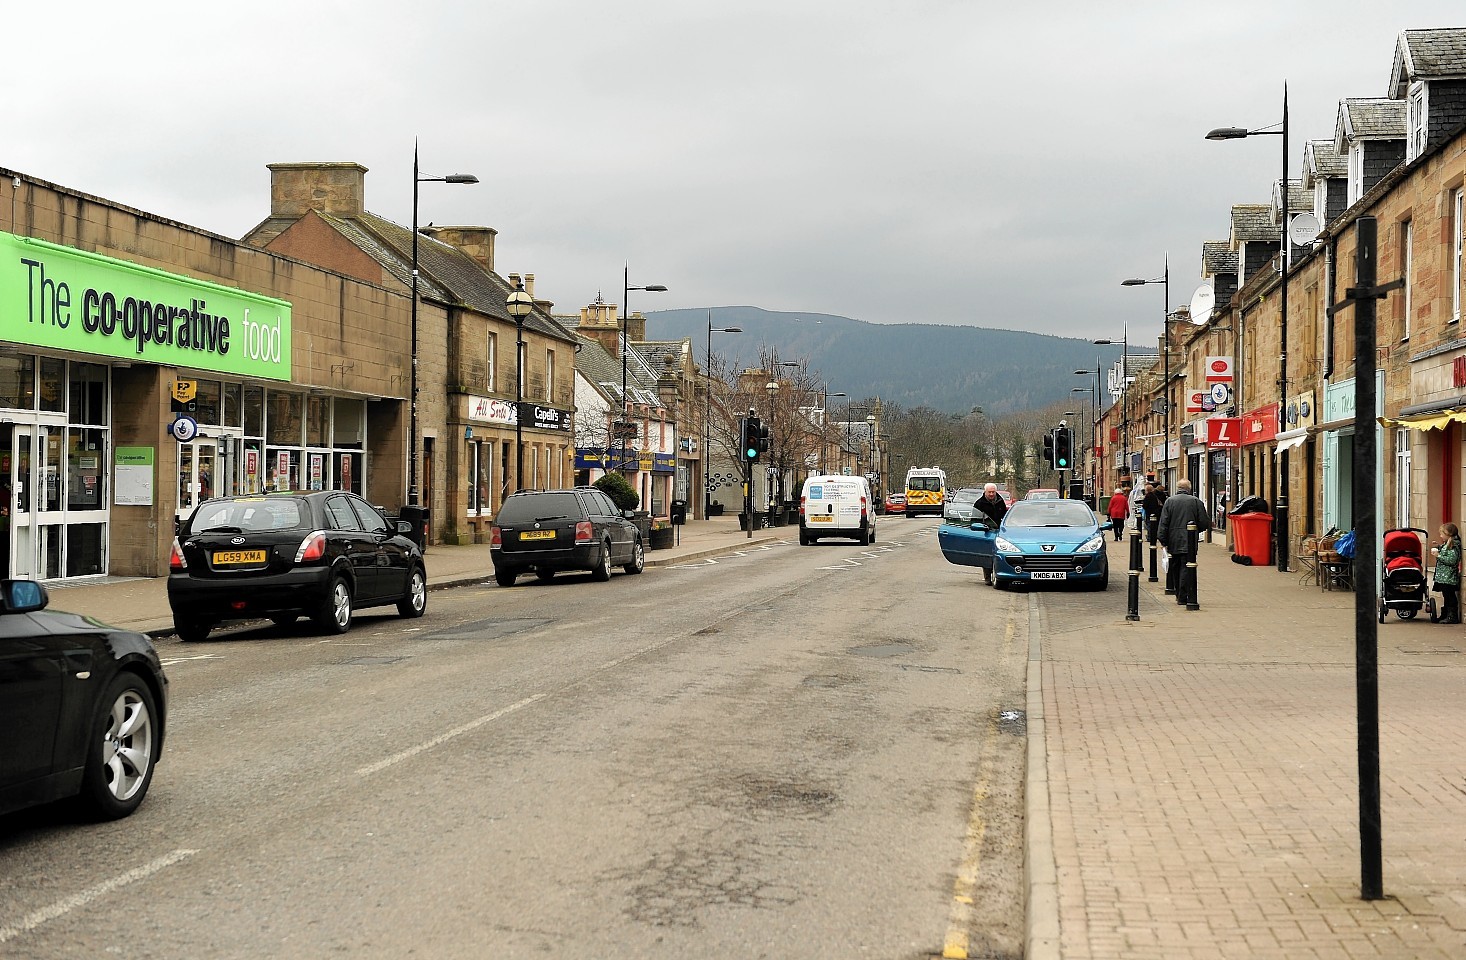 The incident occurred on the High Street in Alness. Image DC Thomson